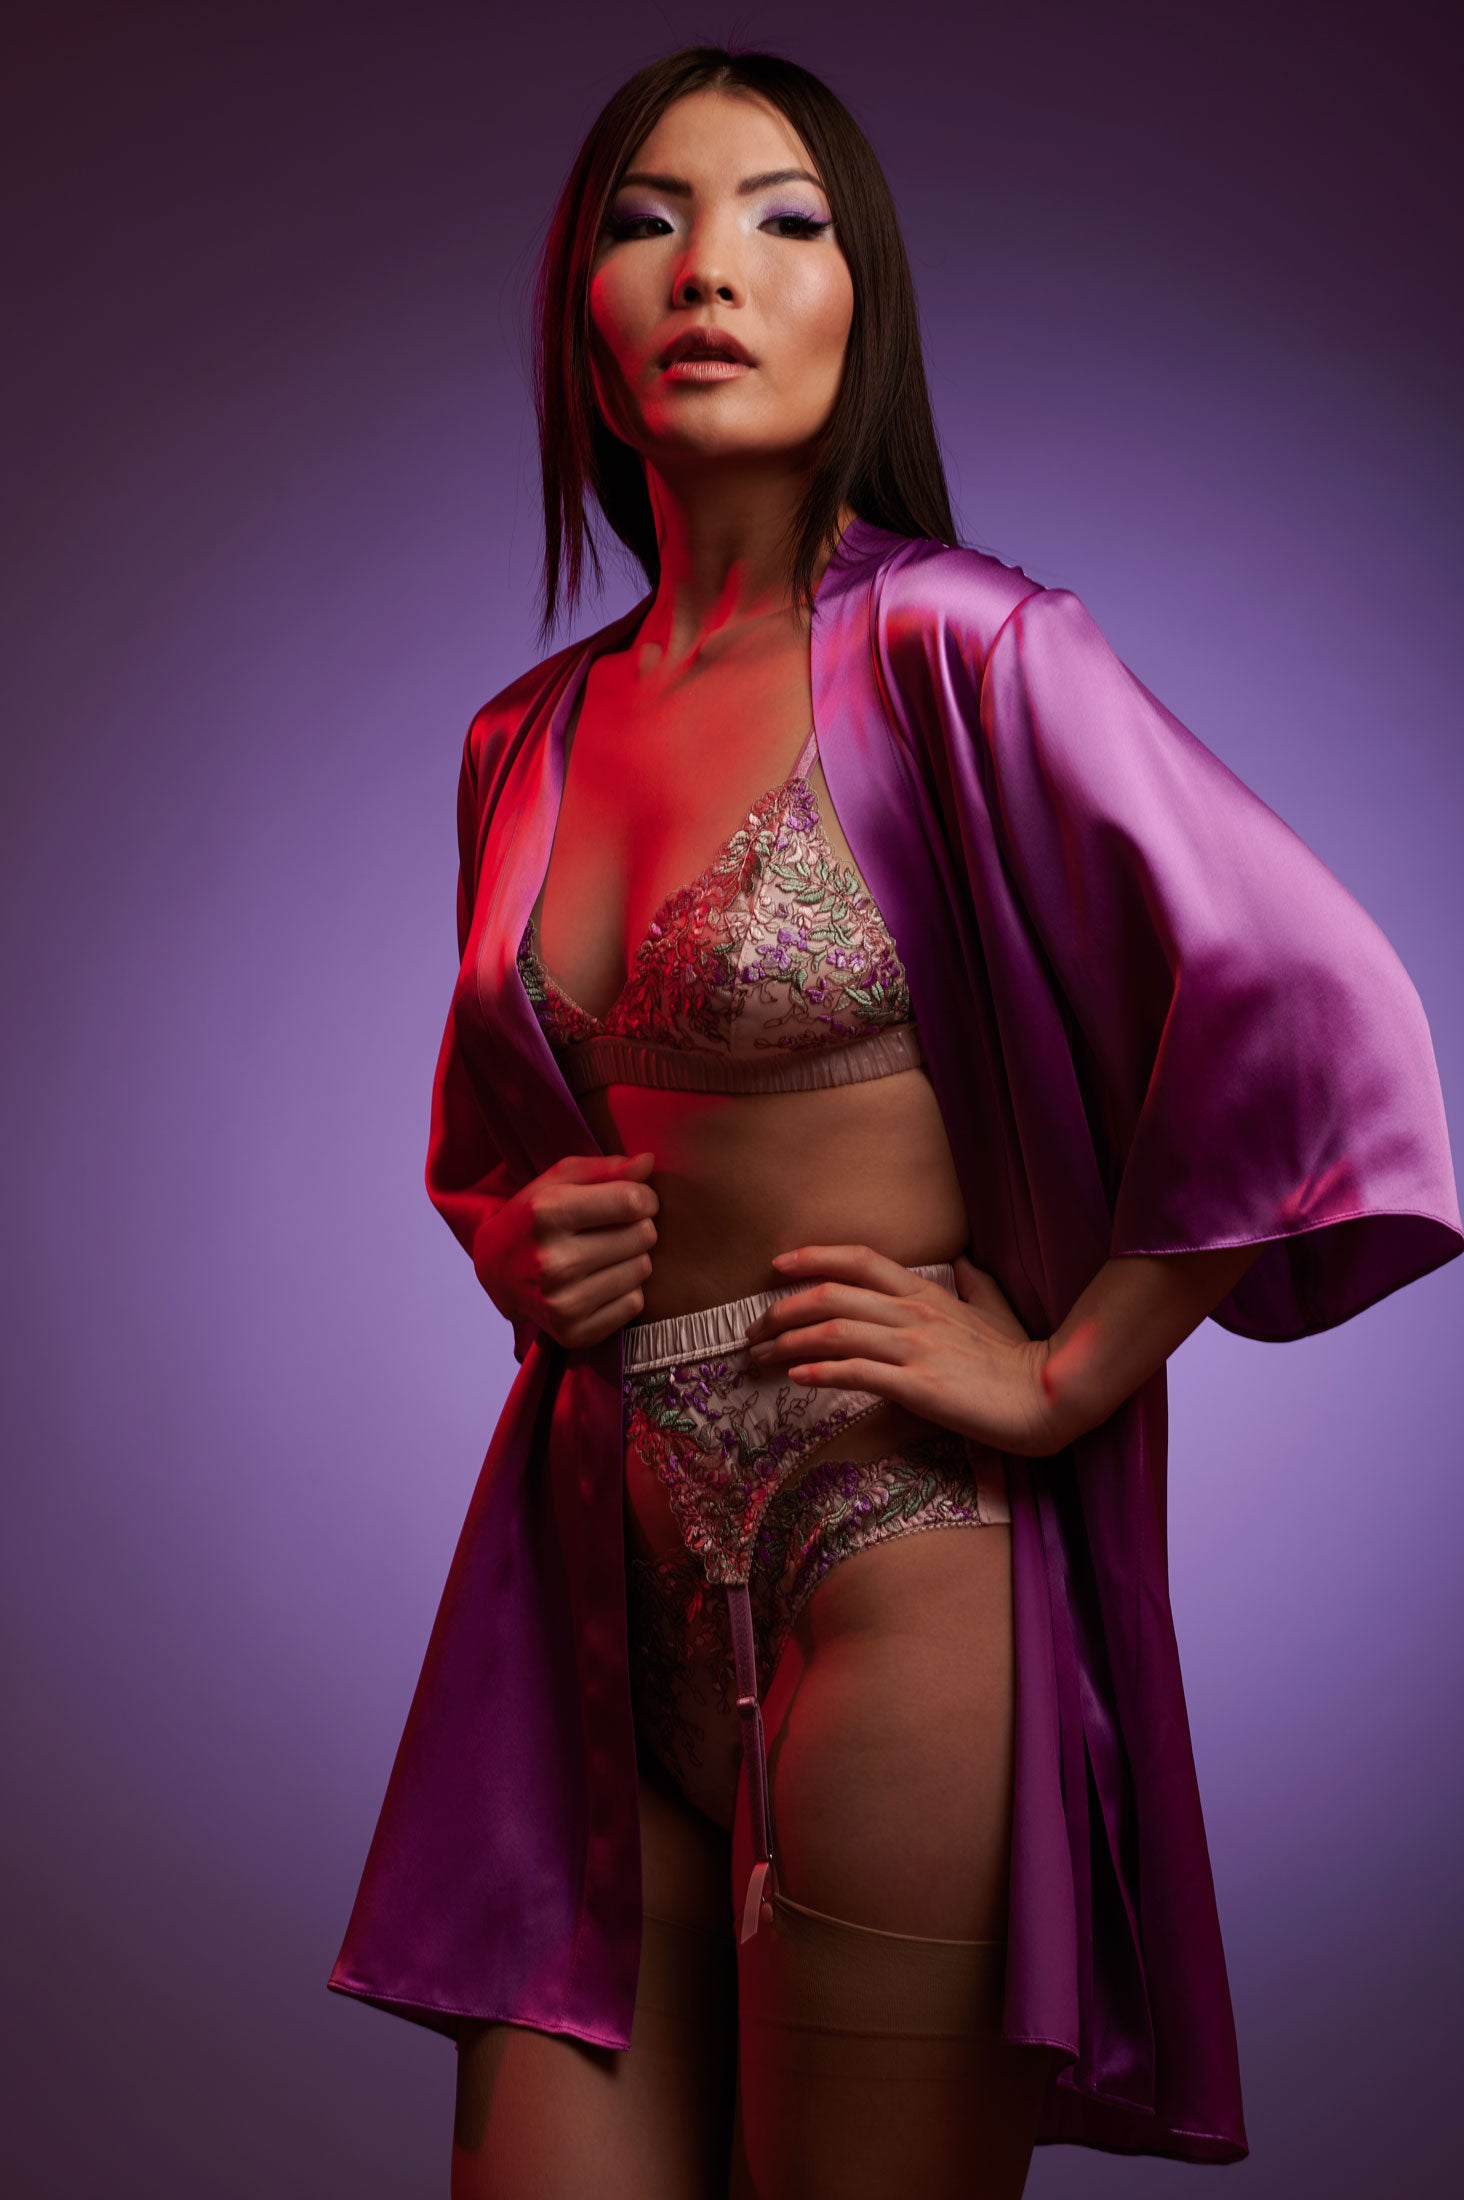 Luxury emboidered lingerie set in pink and purple with a silk kimono robe